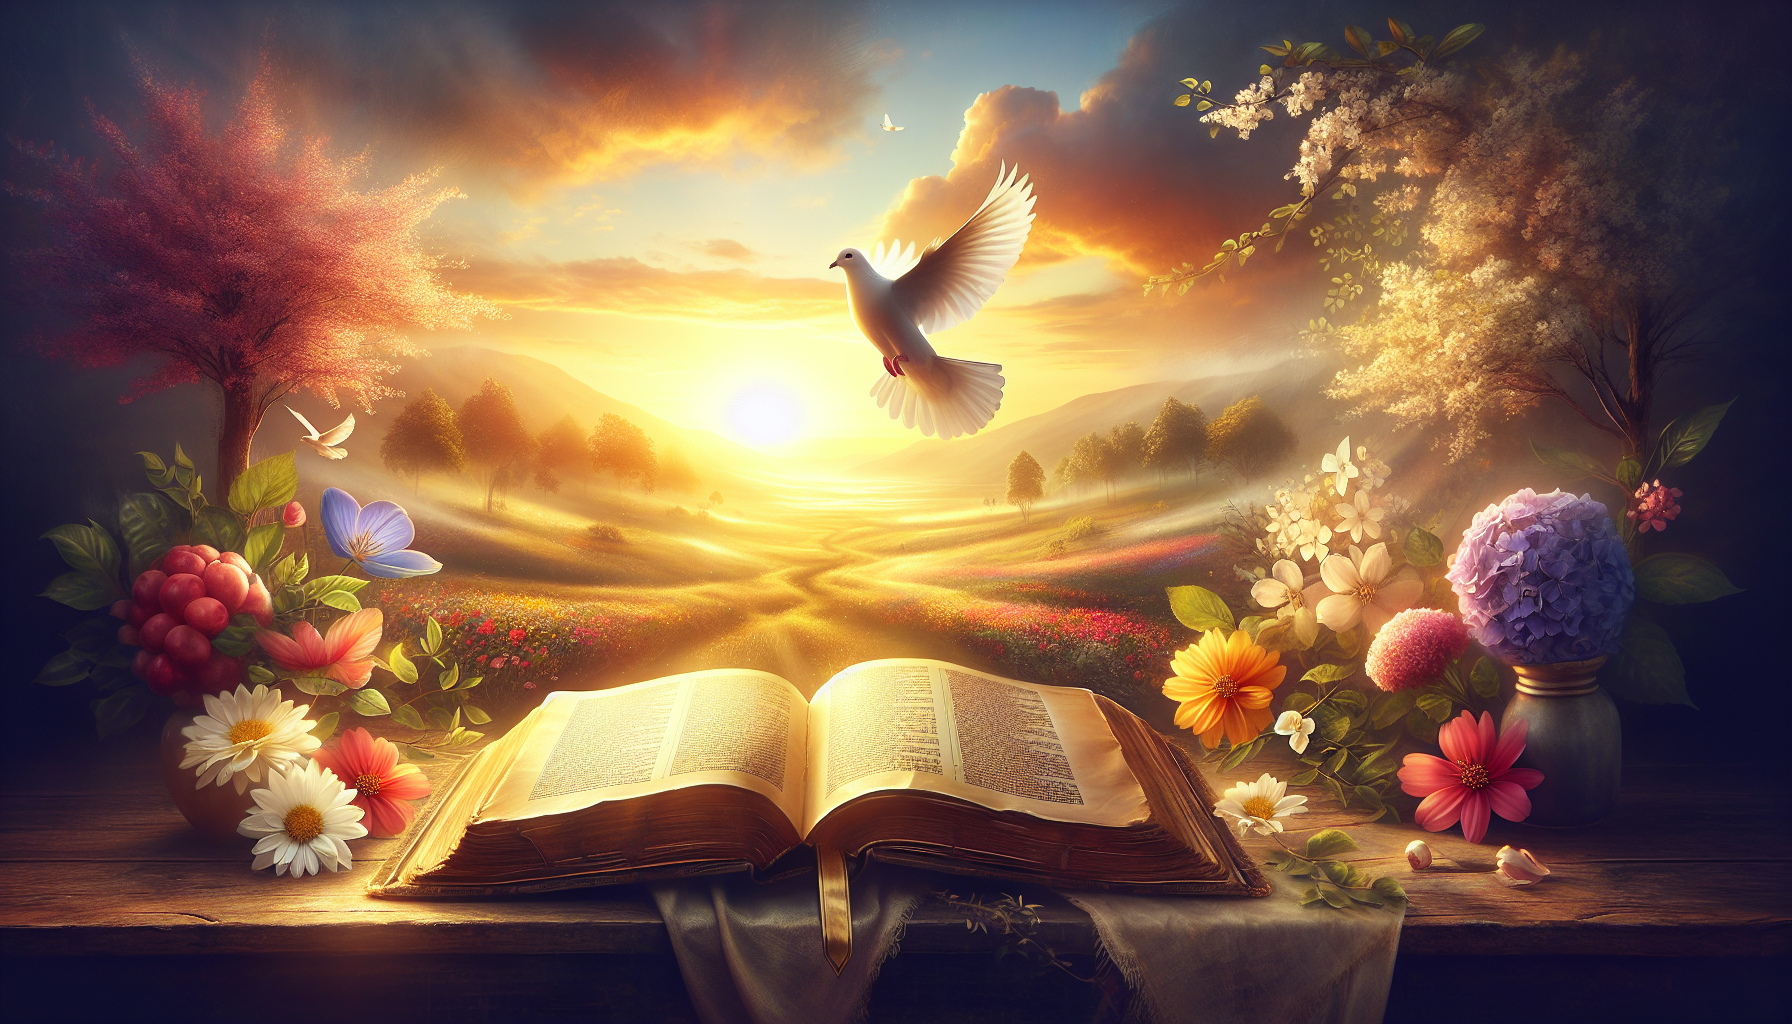 Create an image featuring a serene and radiant landscape bathed in soft golden light, symbolizing hope. In the foreground, depict an open Bible resting on a table with the page turned to Romans 15:13